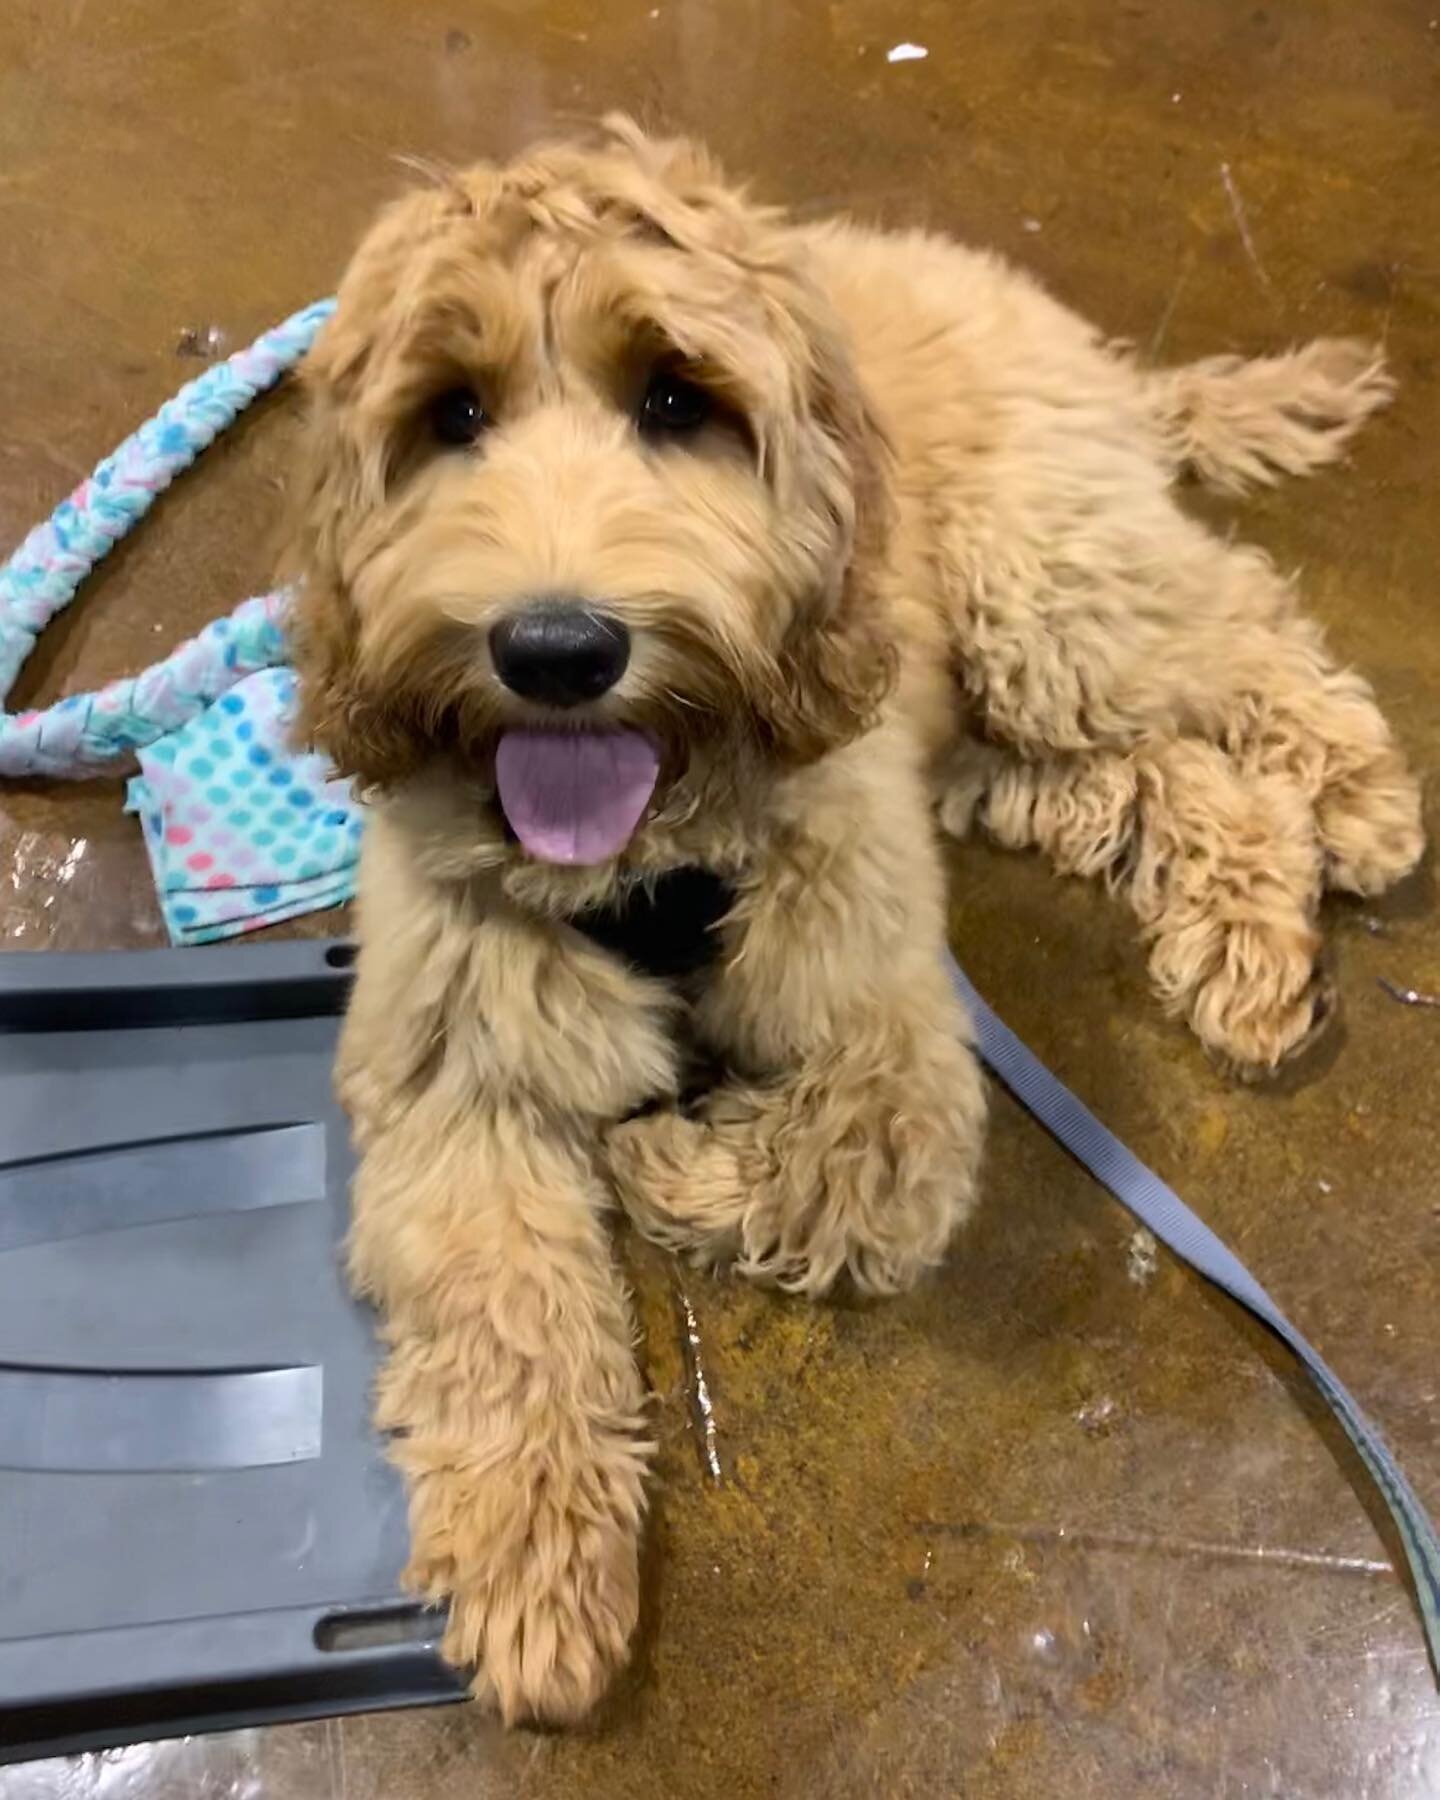 Wags was the new kiddo in Day Camp today. He felt a bit shy when he arrived, but warmed up quickly. By the end of the day he had decided that wrestling was pretty great. Welcome Wags 🐶🙌😍🥳. #wonderpuppypdx #puppydaycampwp #positivereinforcementdog